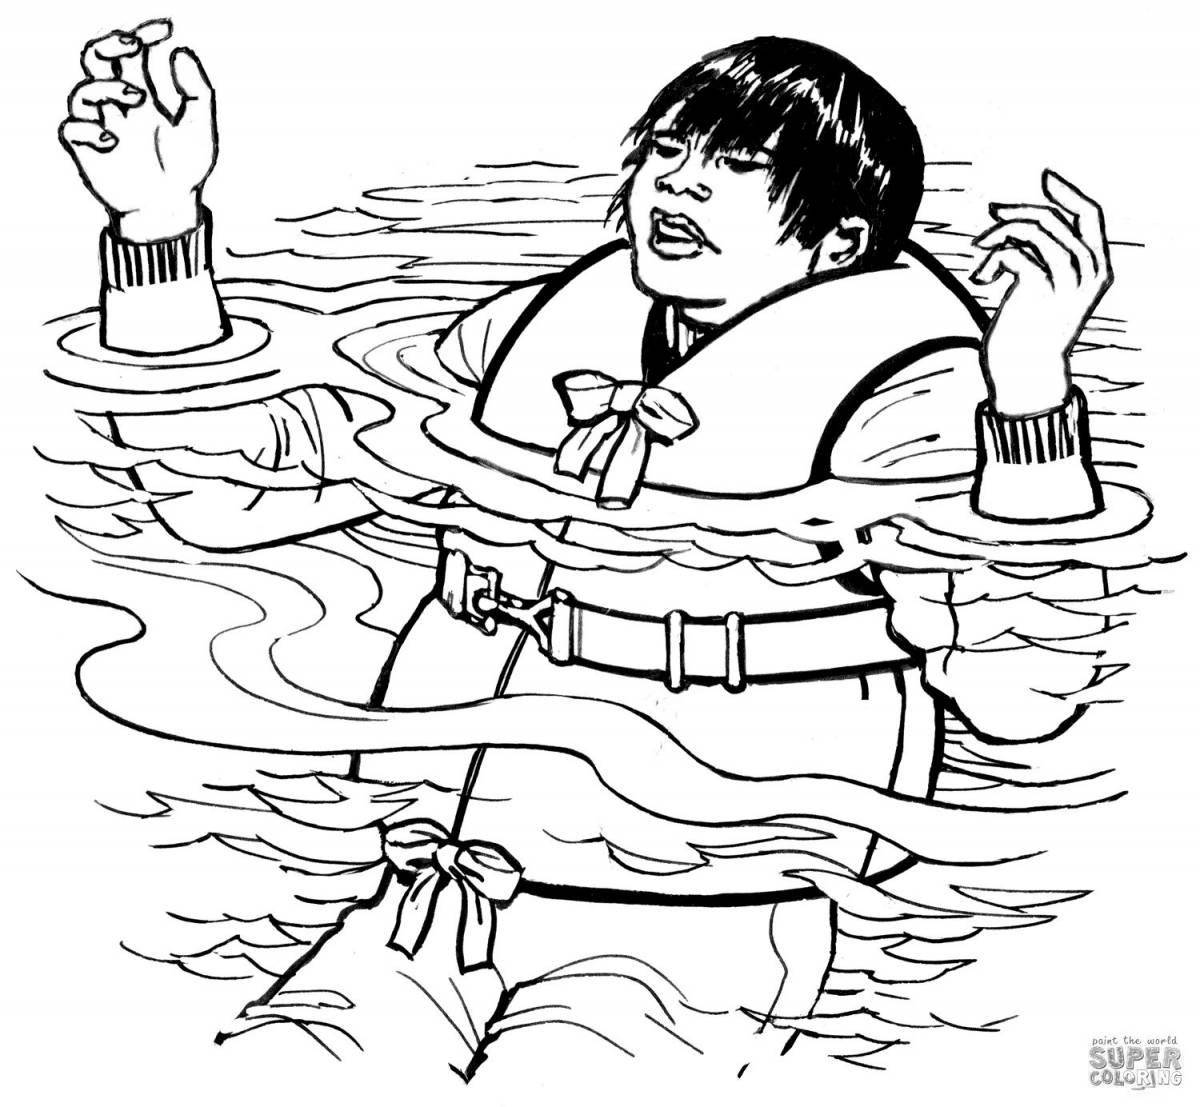 Fun water safety coloring page